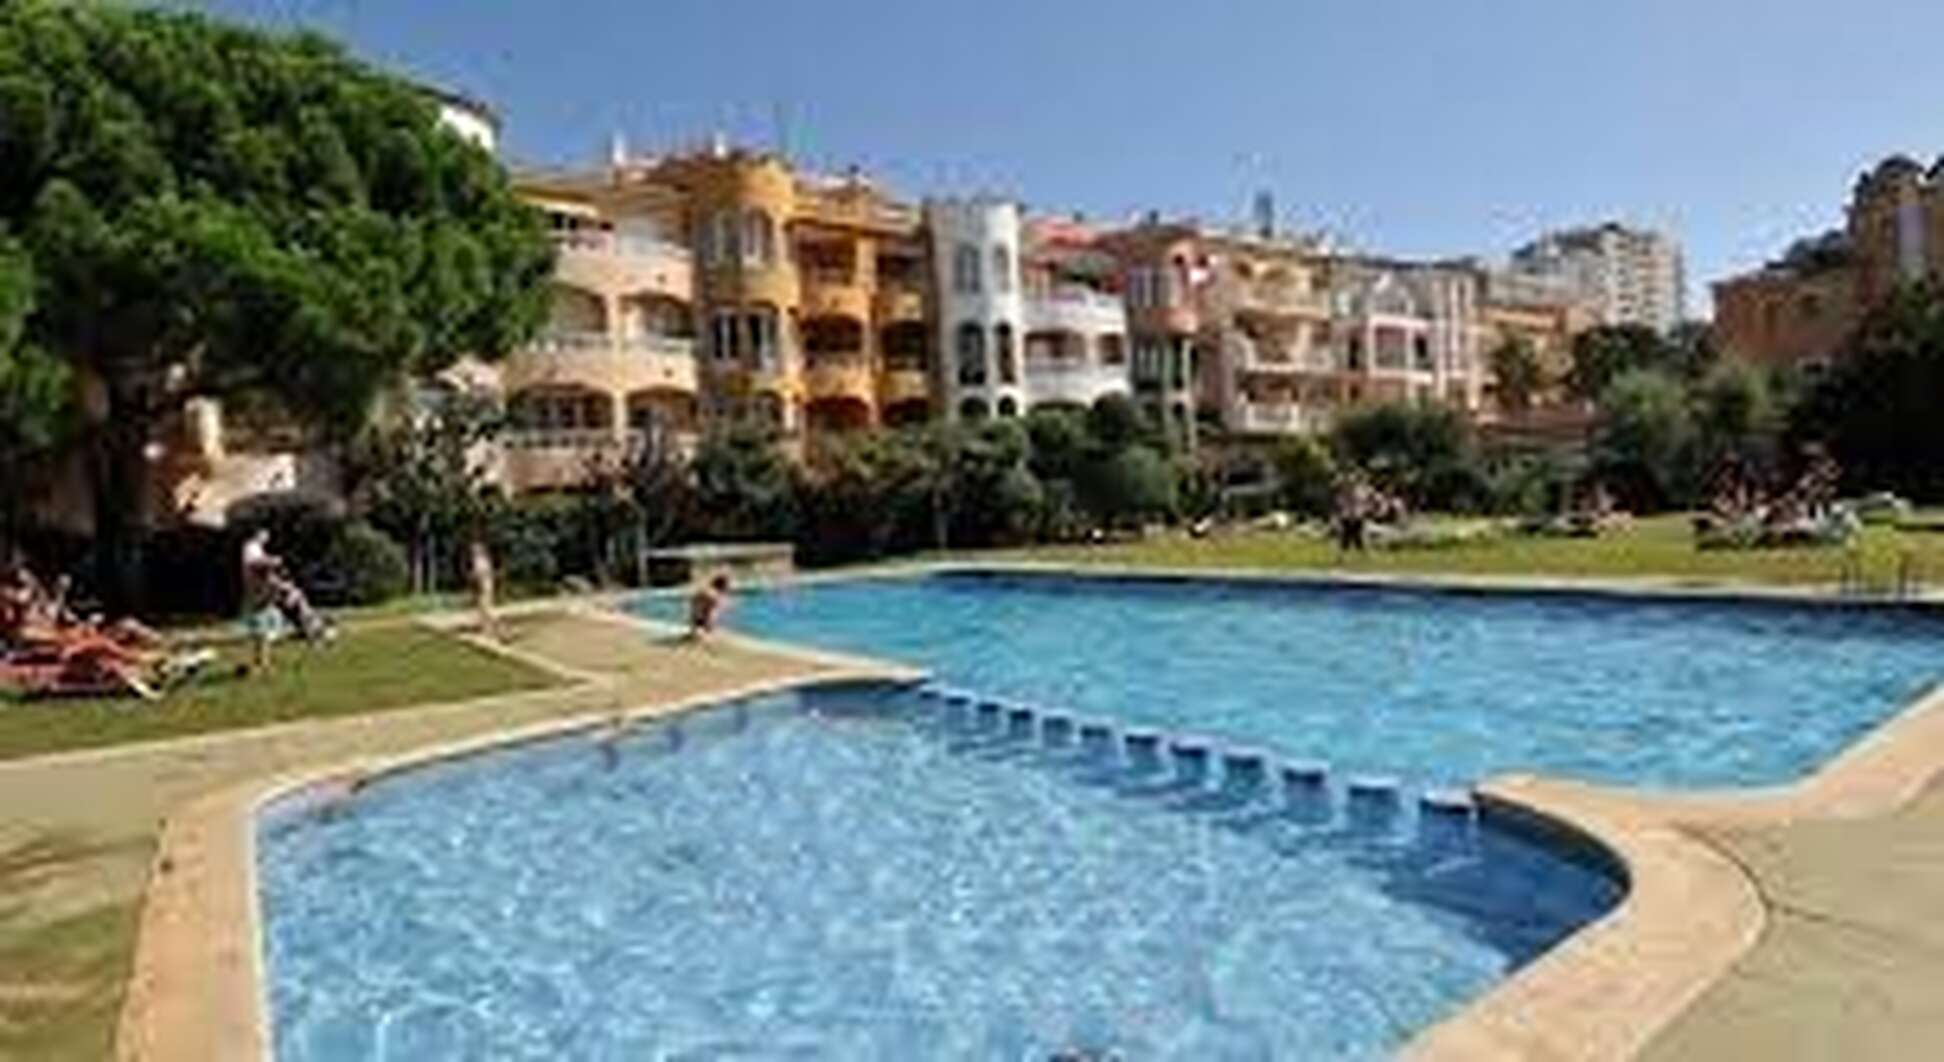 Flat for sale in the centre of Empuriabrava